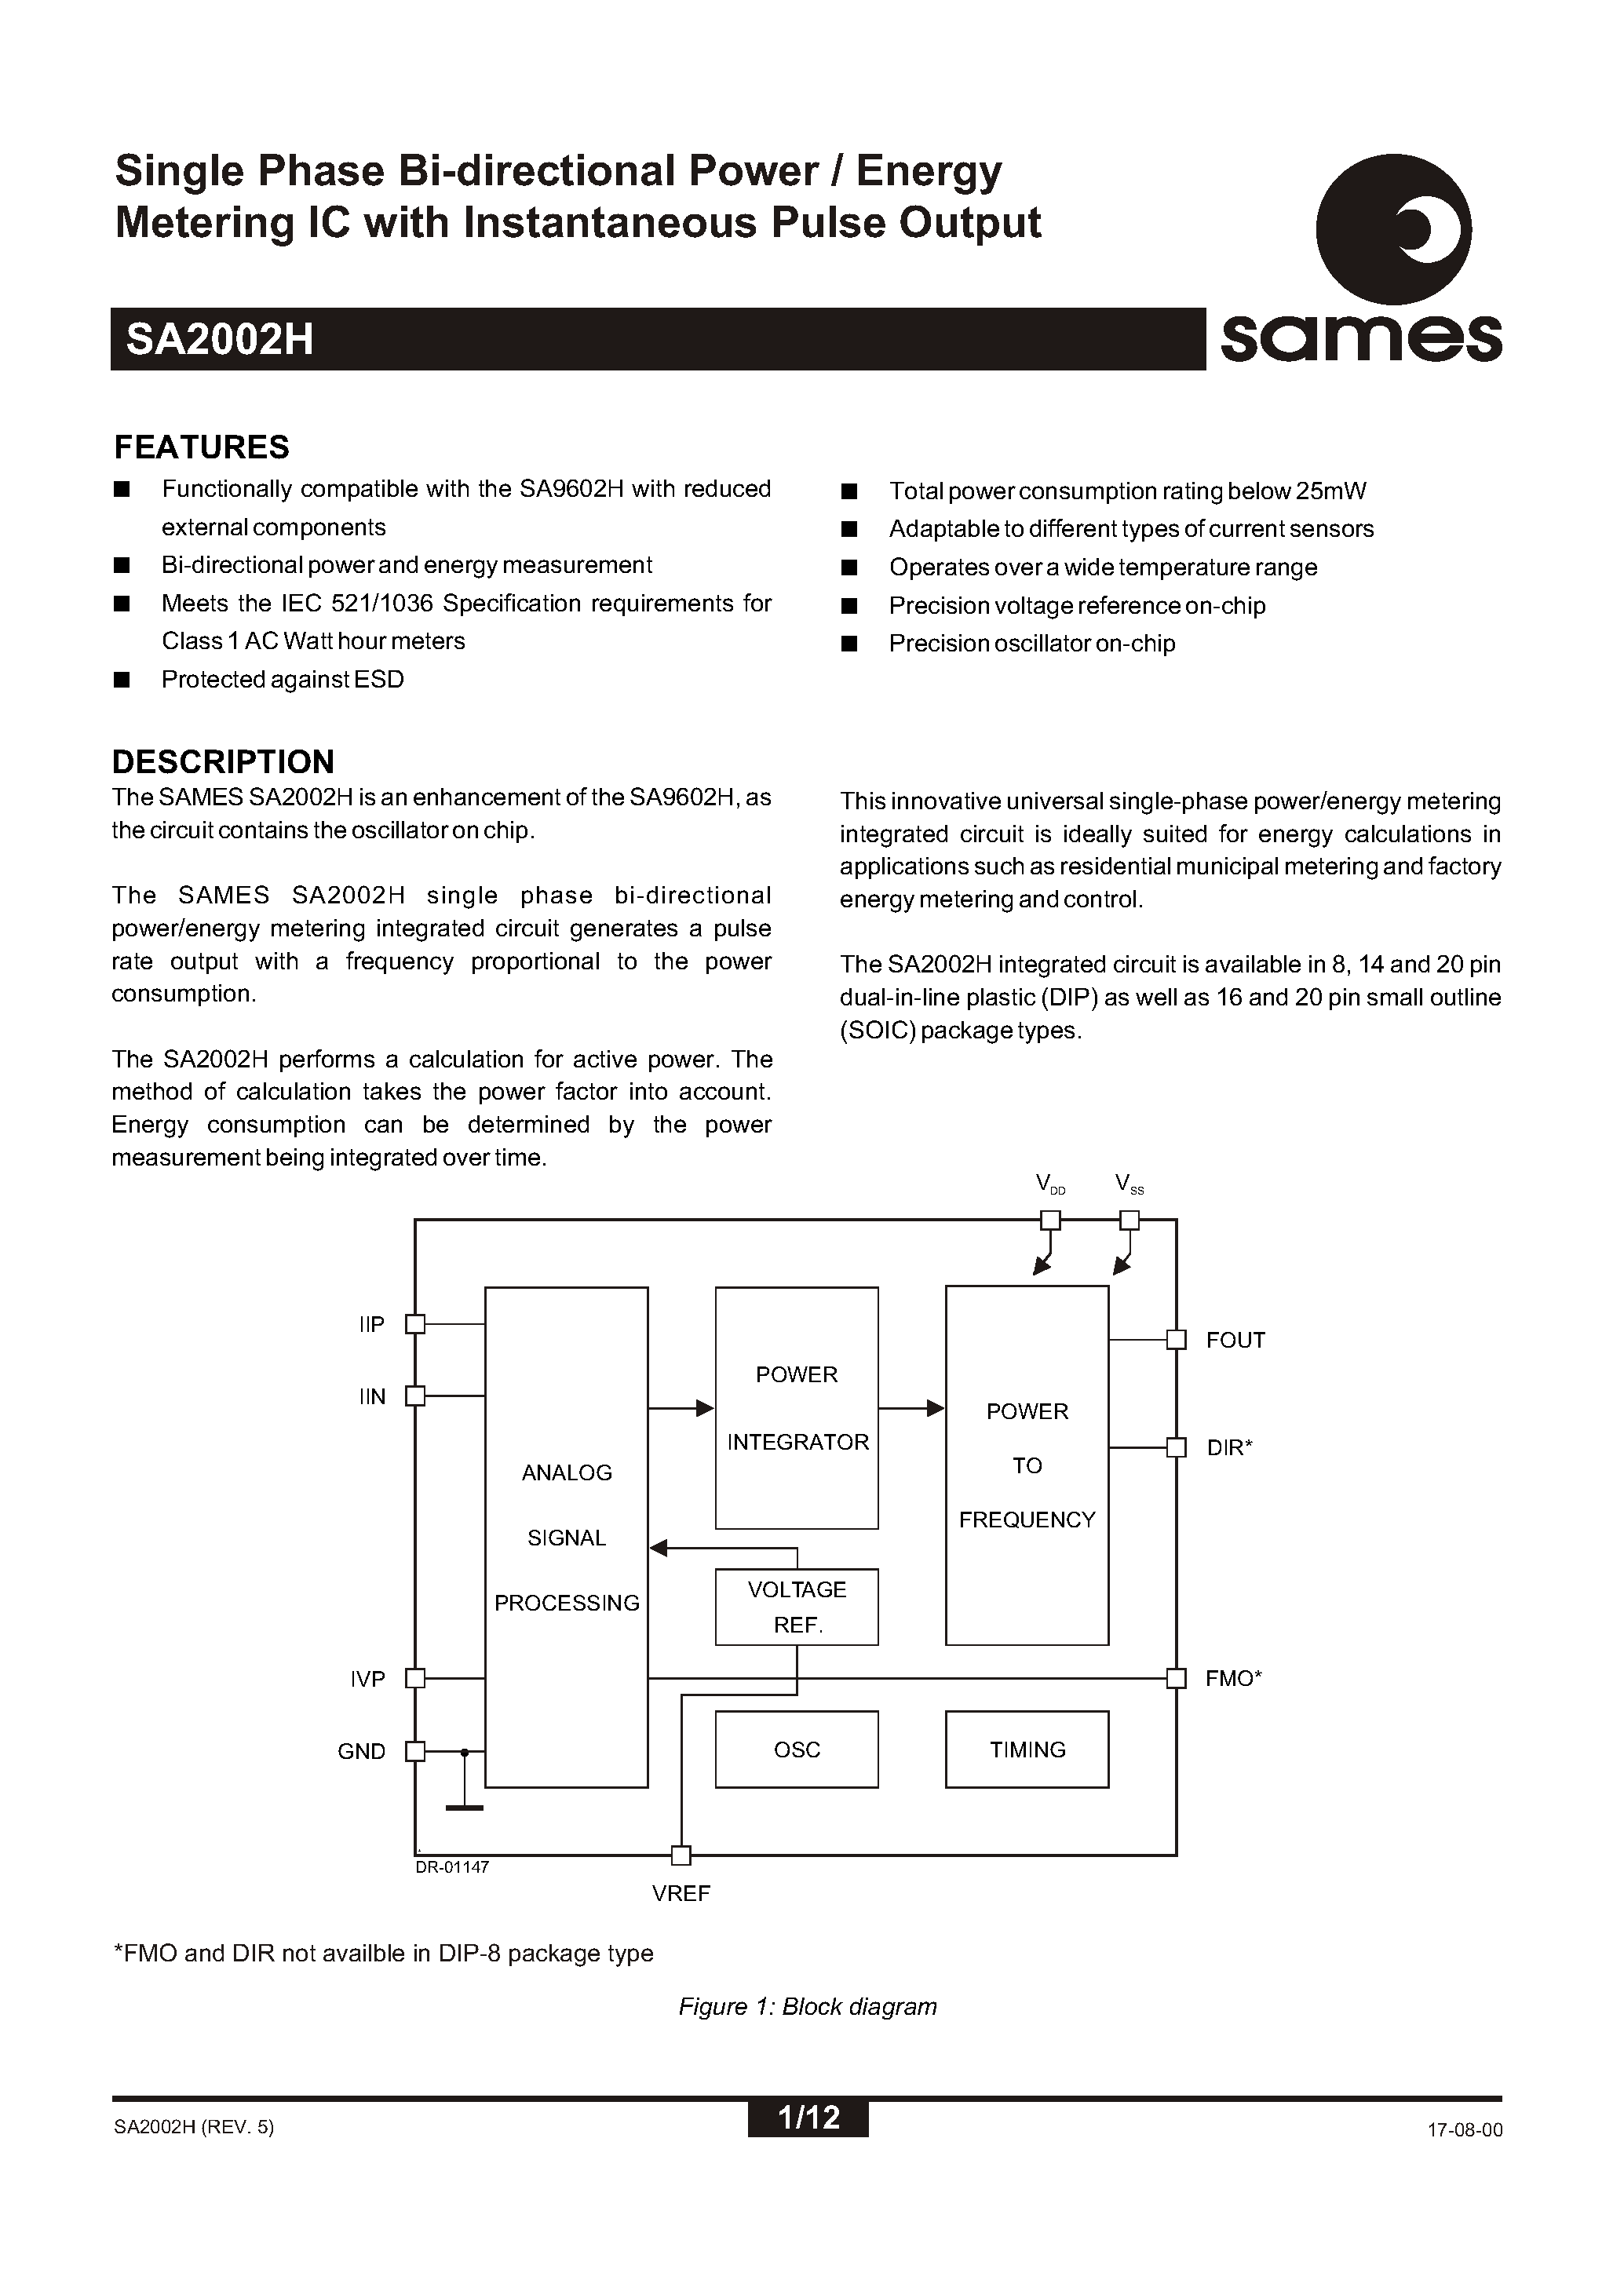 Datasheet SA2002 - Single Phase Bi-directional Power / Energy Metering IC with Instantaneous Pulse Output page 1